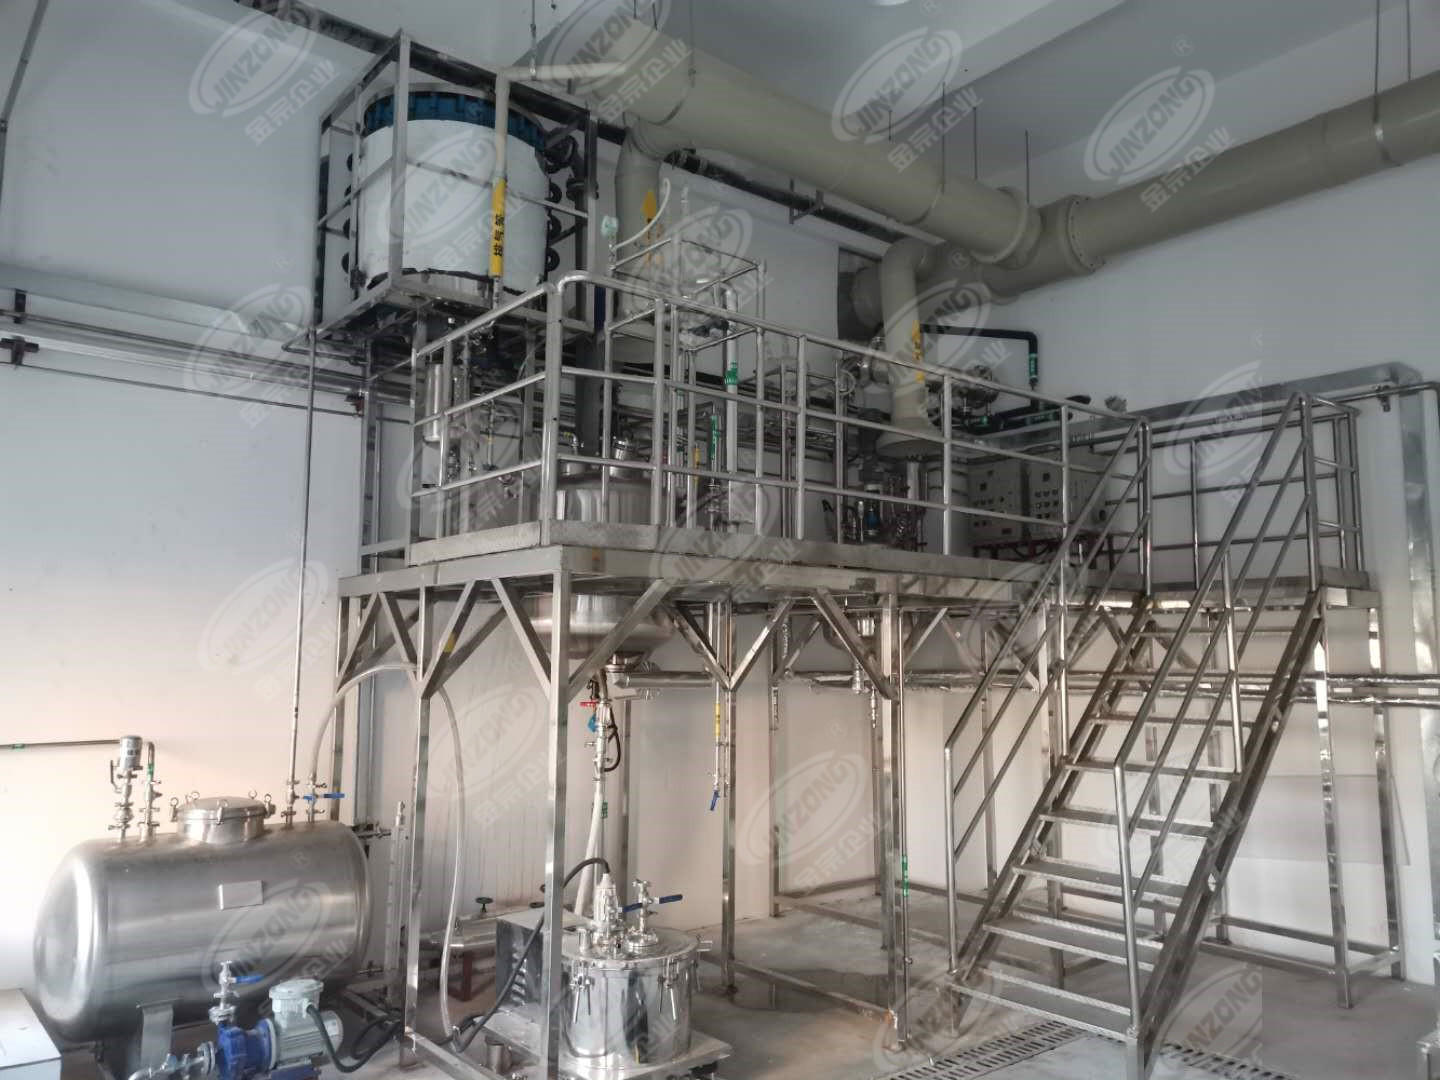 Jinzong Machinery multi function equipment used in pharmaceutical industry for business for food industries